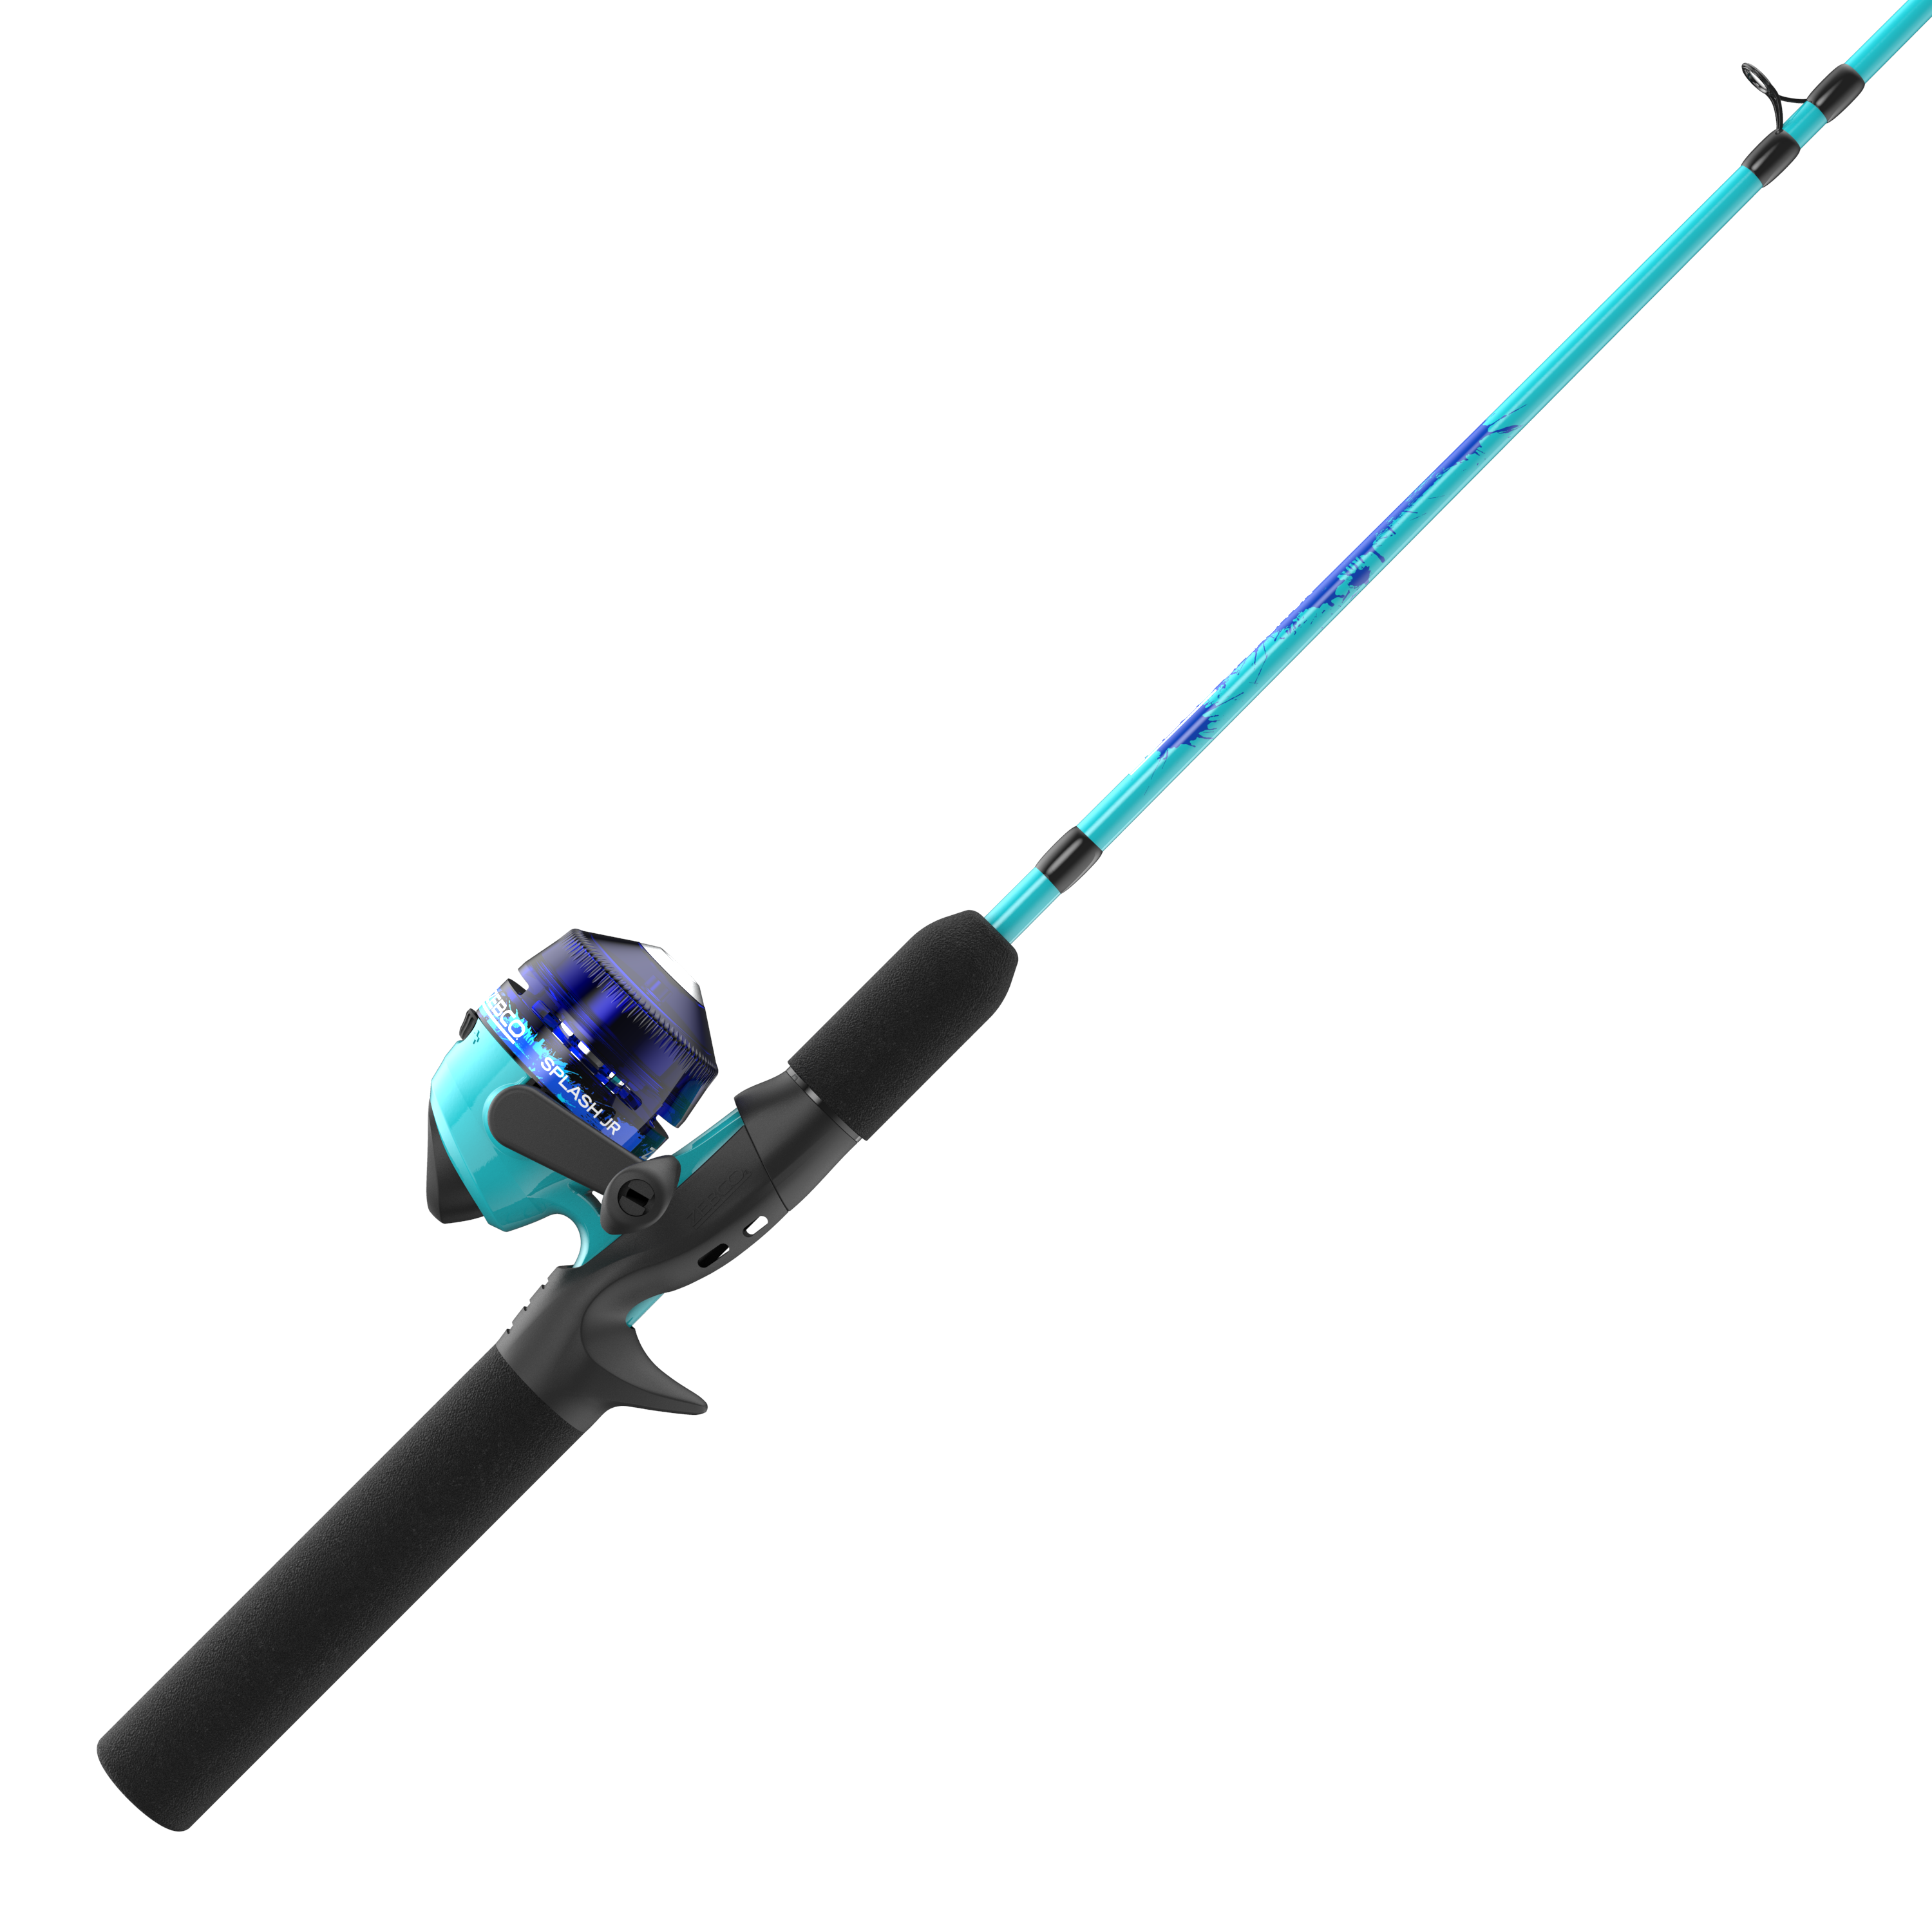 ZHENDUO OUTDOOR Kids Fishing Rod & Reel Combo Kit with Tackles, Net, and  Bucket - Perfect Gift for Boys and Girls